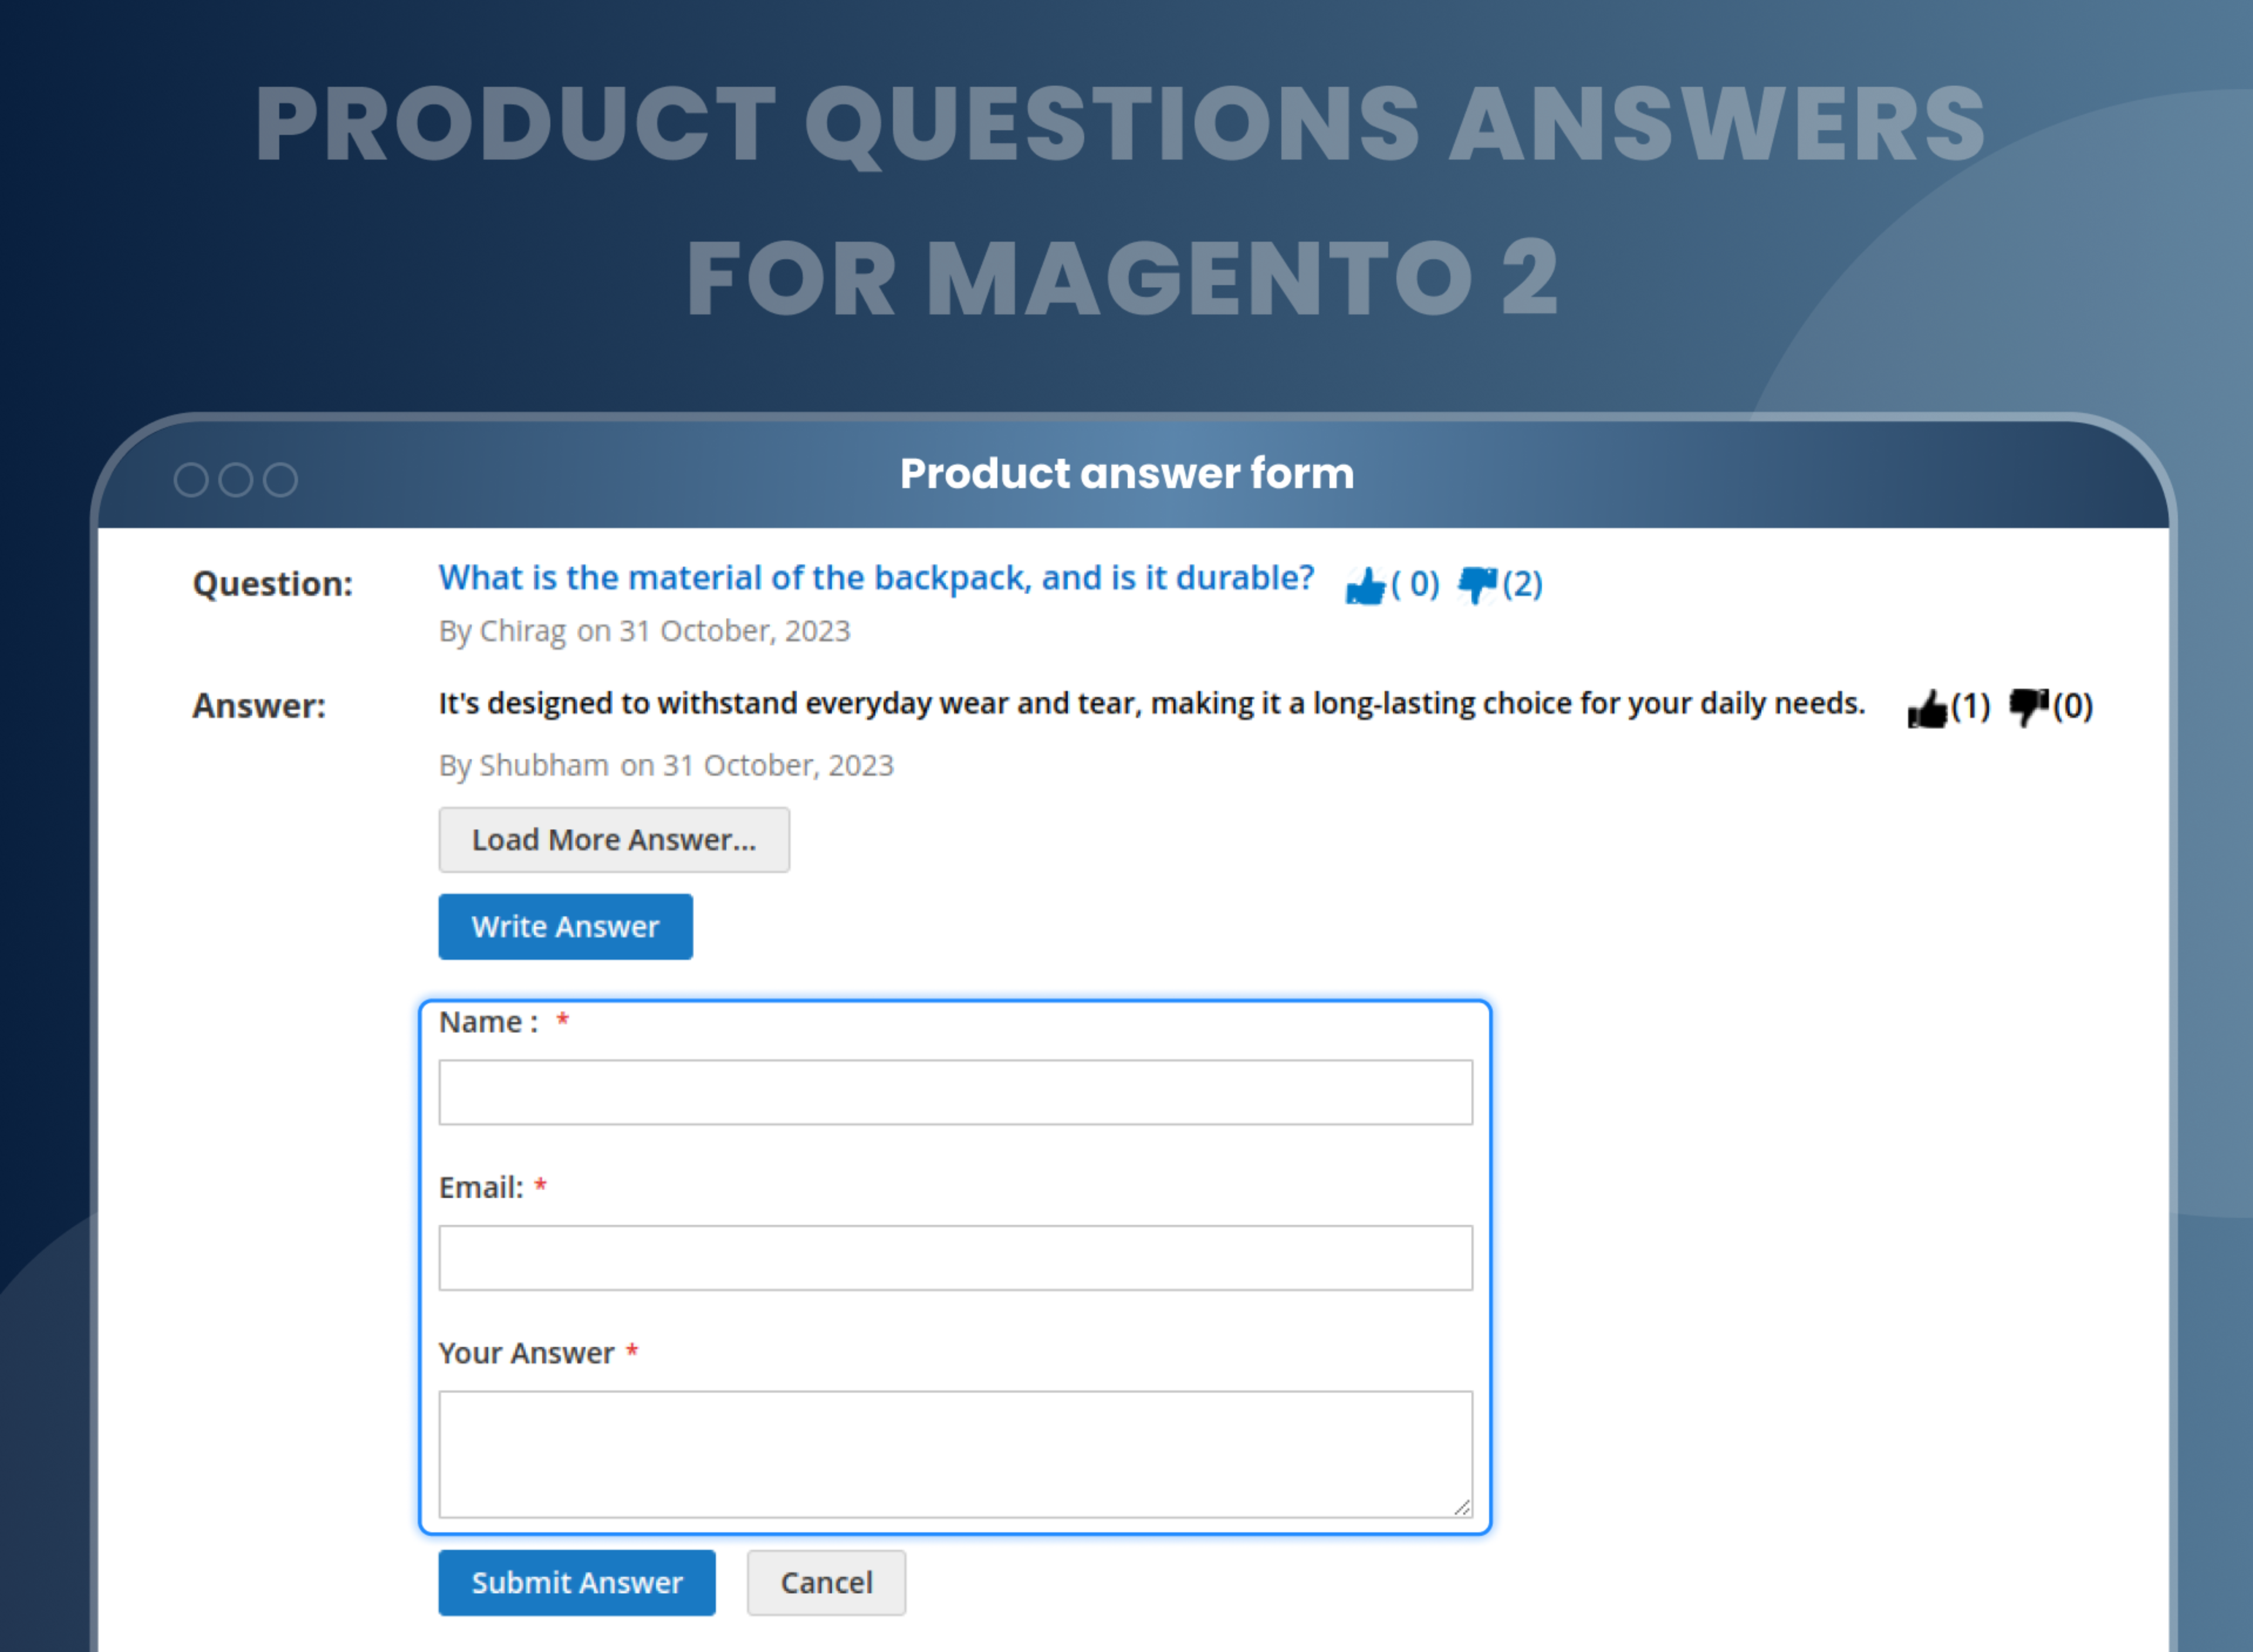 Product answer form